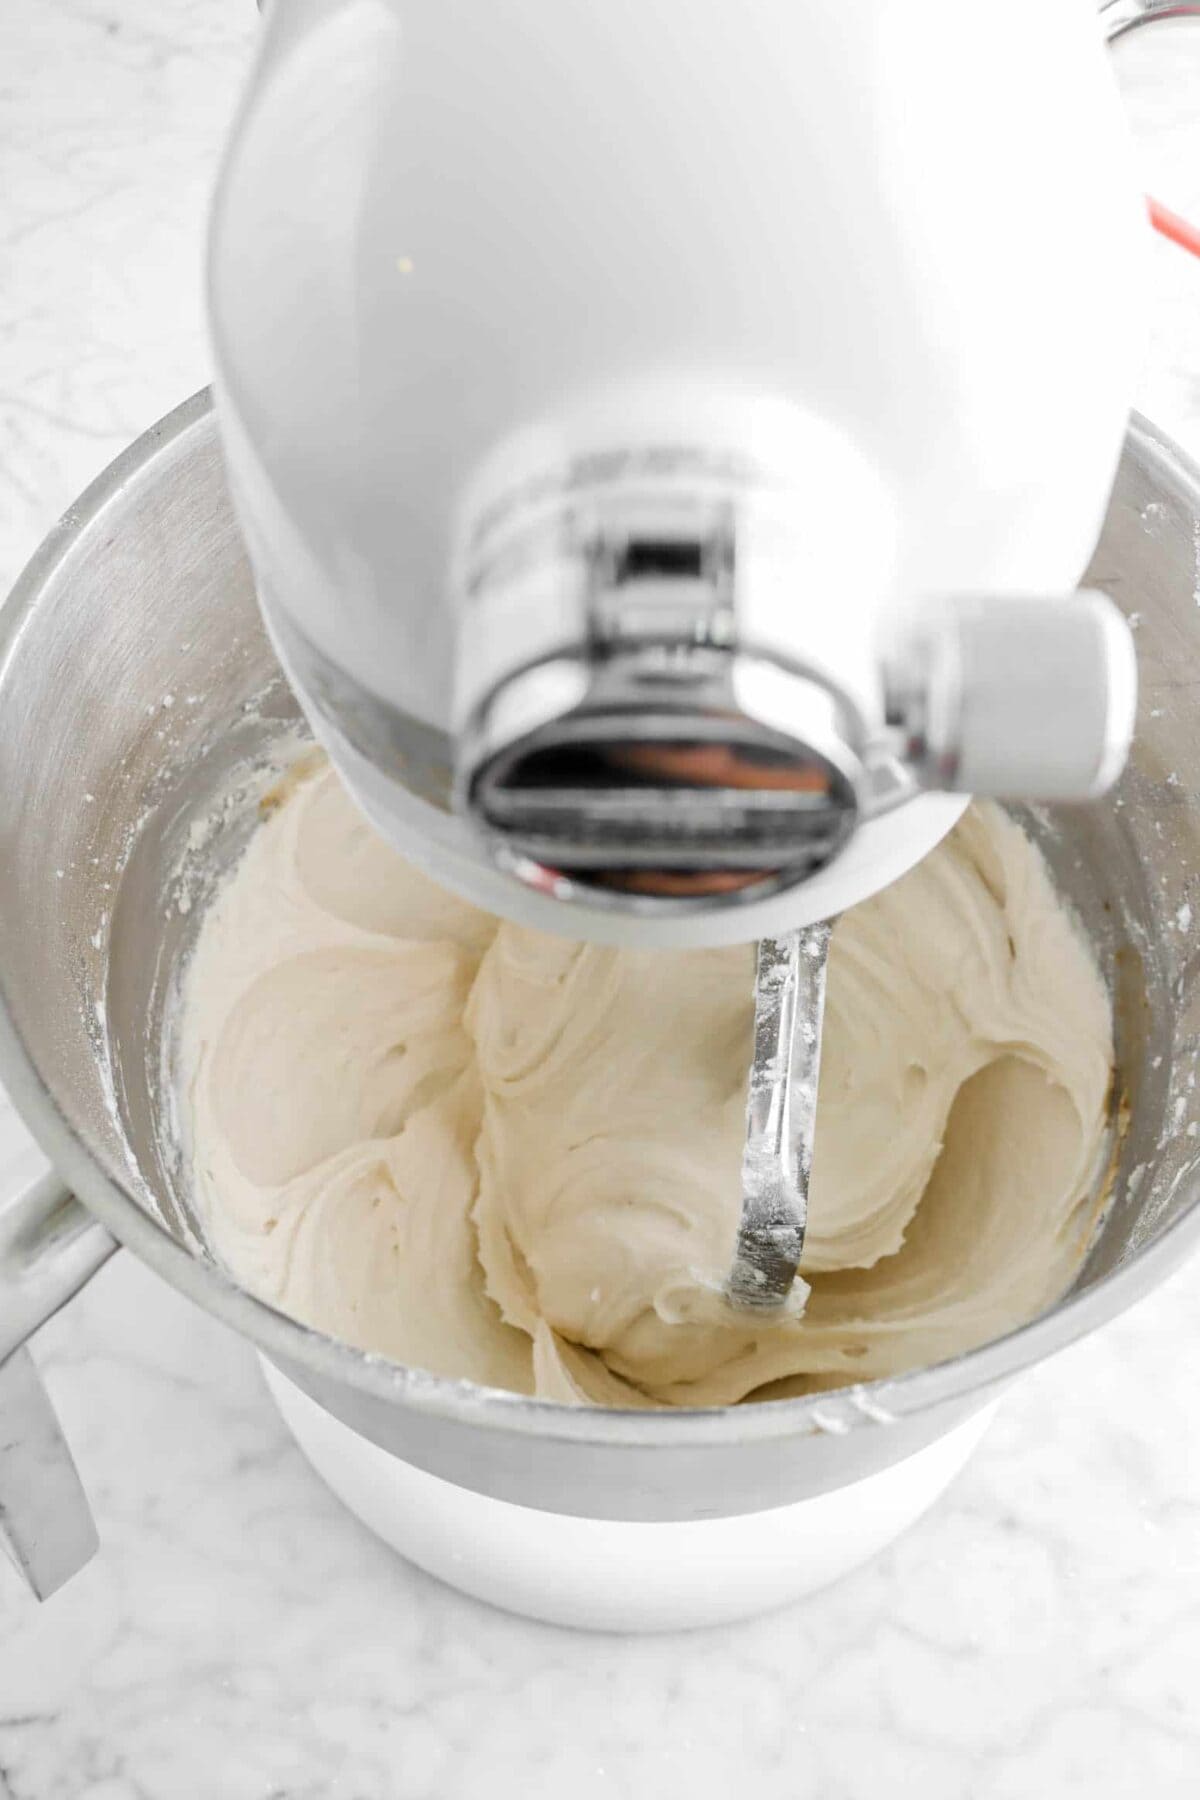 cake batter in a mixer bowl